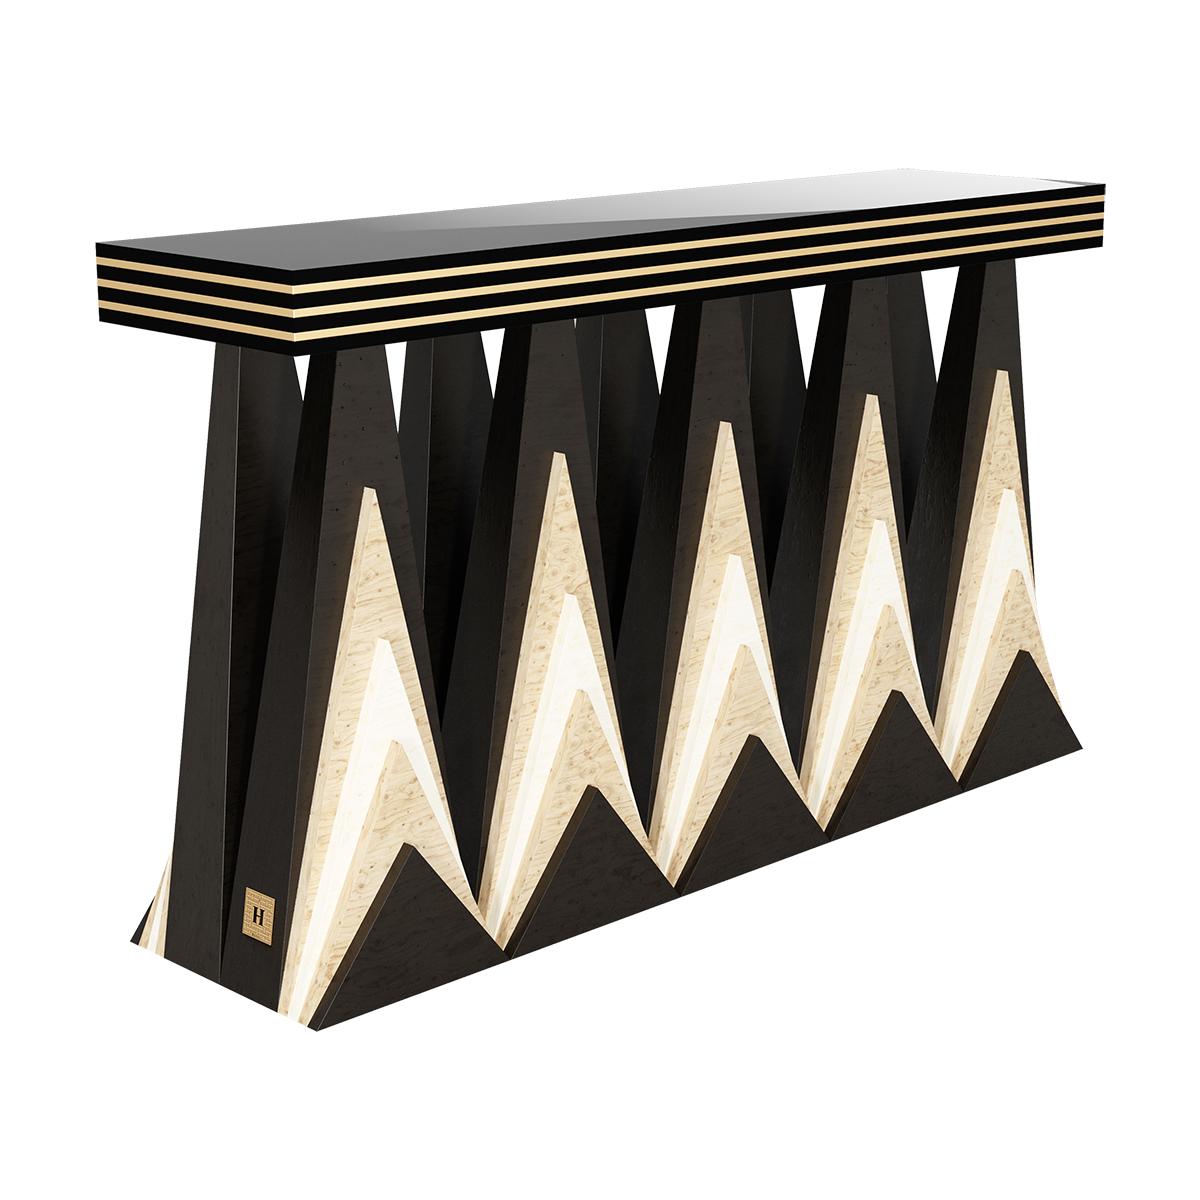 Raplee Console Table is an Art Deco-inspired modern console table. Besides being inspired by this 20s design style, the unique entryway furniture piece also has another inspiration source: the Raplee Ridge in Utah. It mixes a luxury variety of